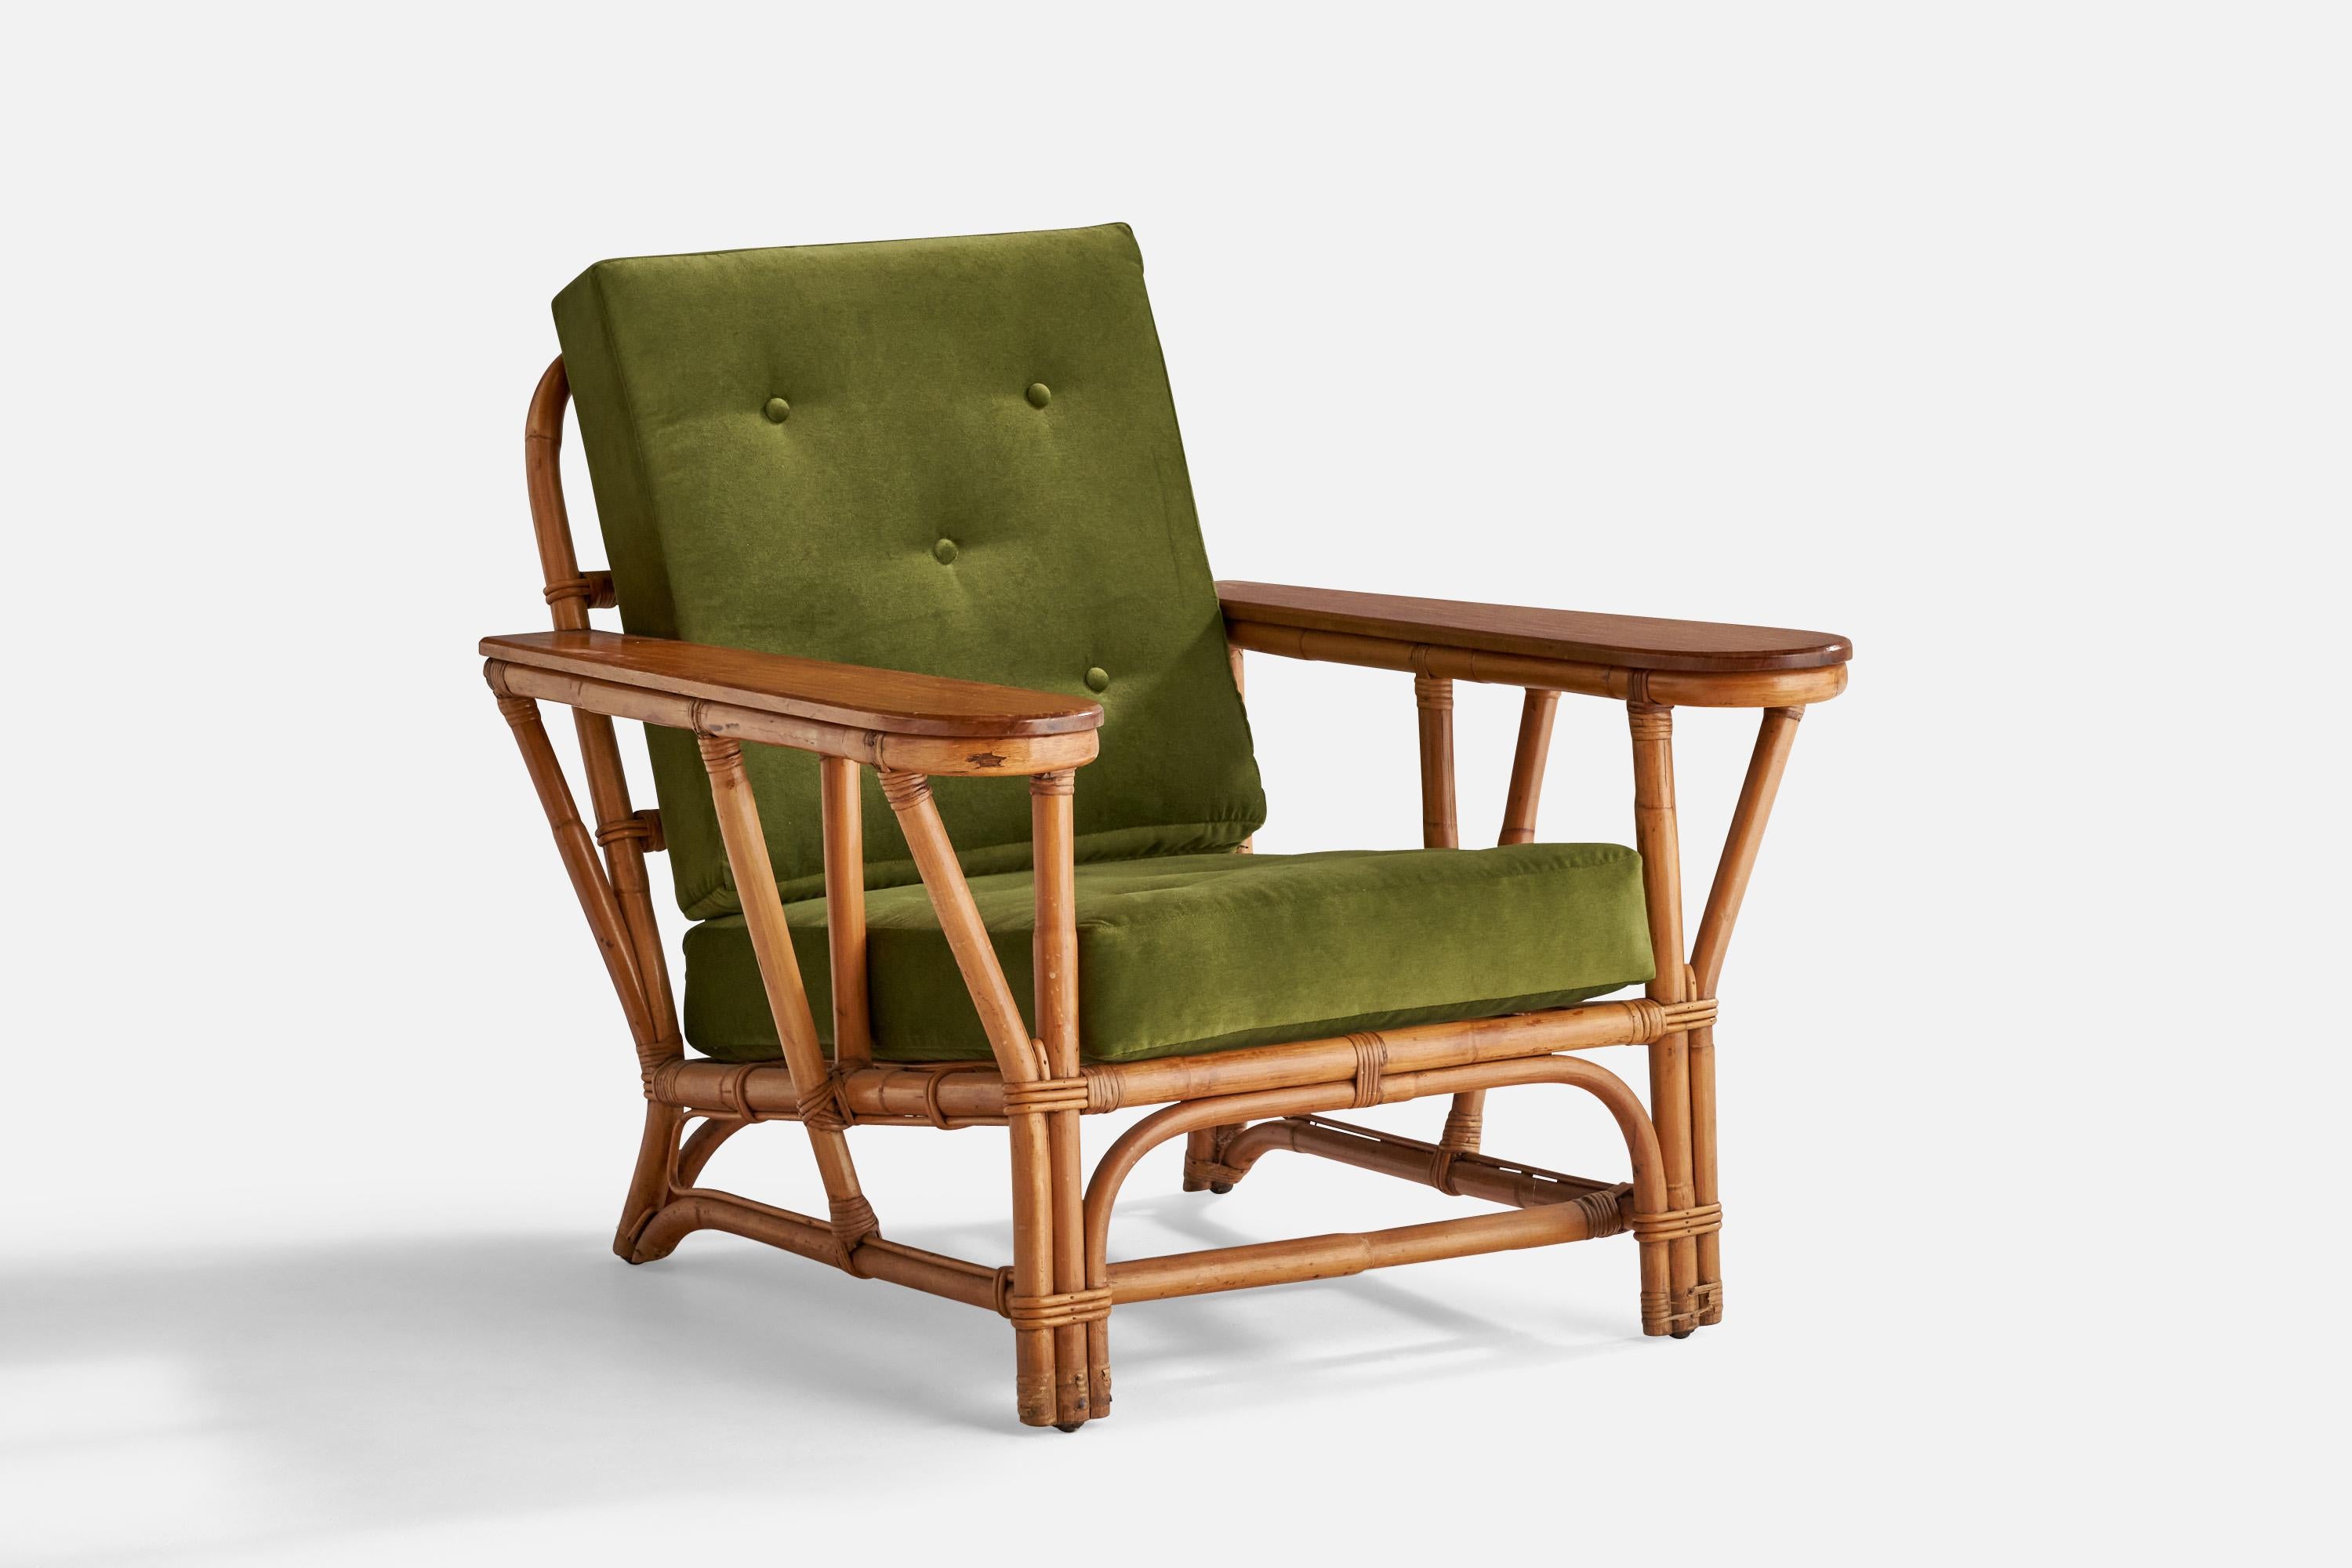 A green velvet, maple, bamboo and rattan lounge chair designed and produced in the US, 1950s.

Seat height: 16.5
